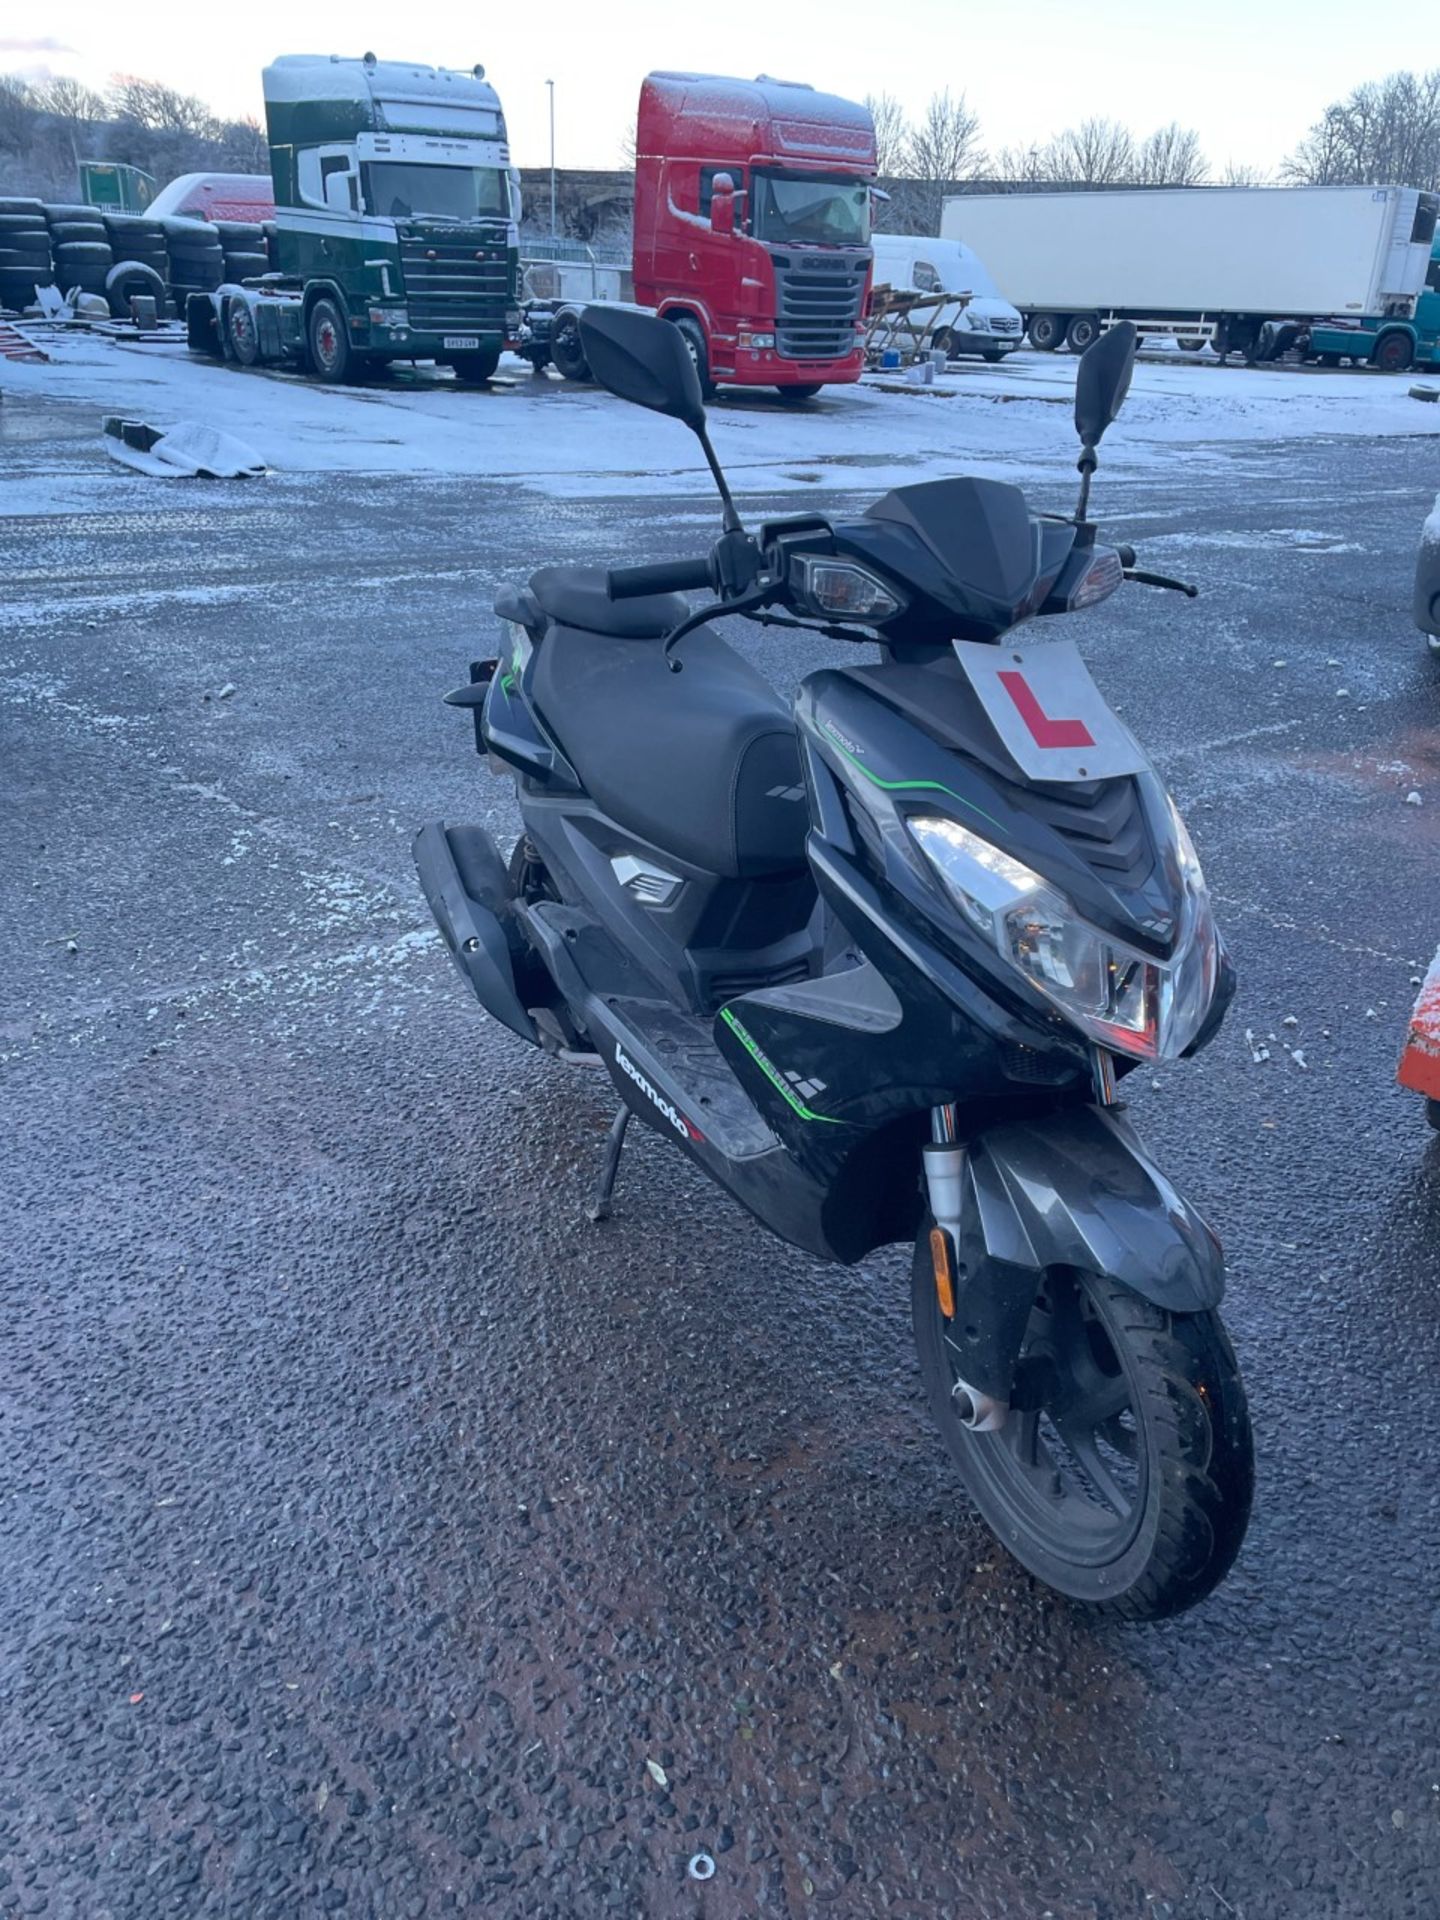 Leximoto enigma ZS 125 2021 model with 3486km on the clock. Good little moped, could do with a